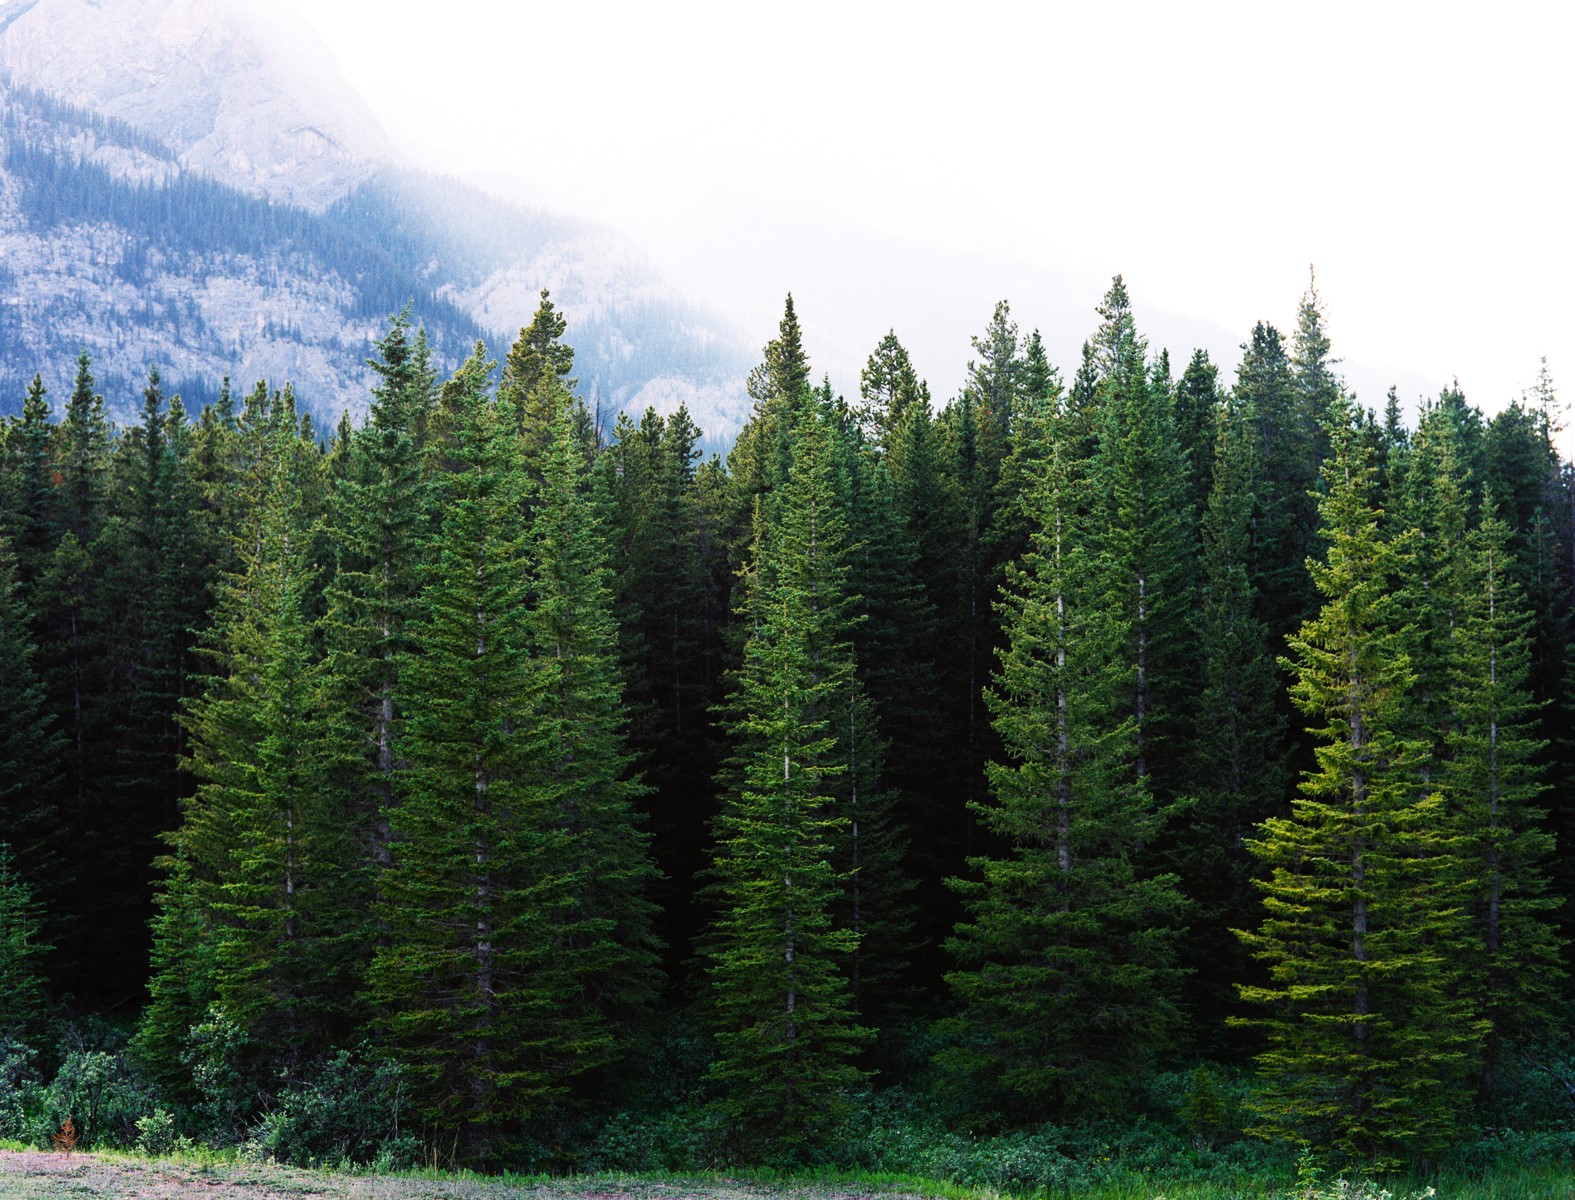 Scale Evergreen Tree What Are the Types of Scale Evergreen Trees